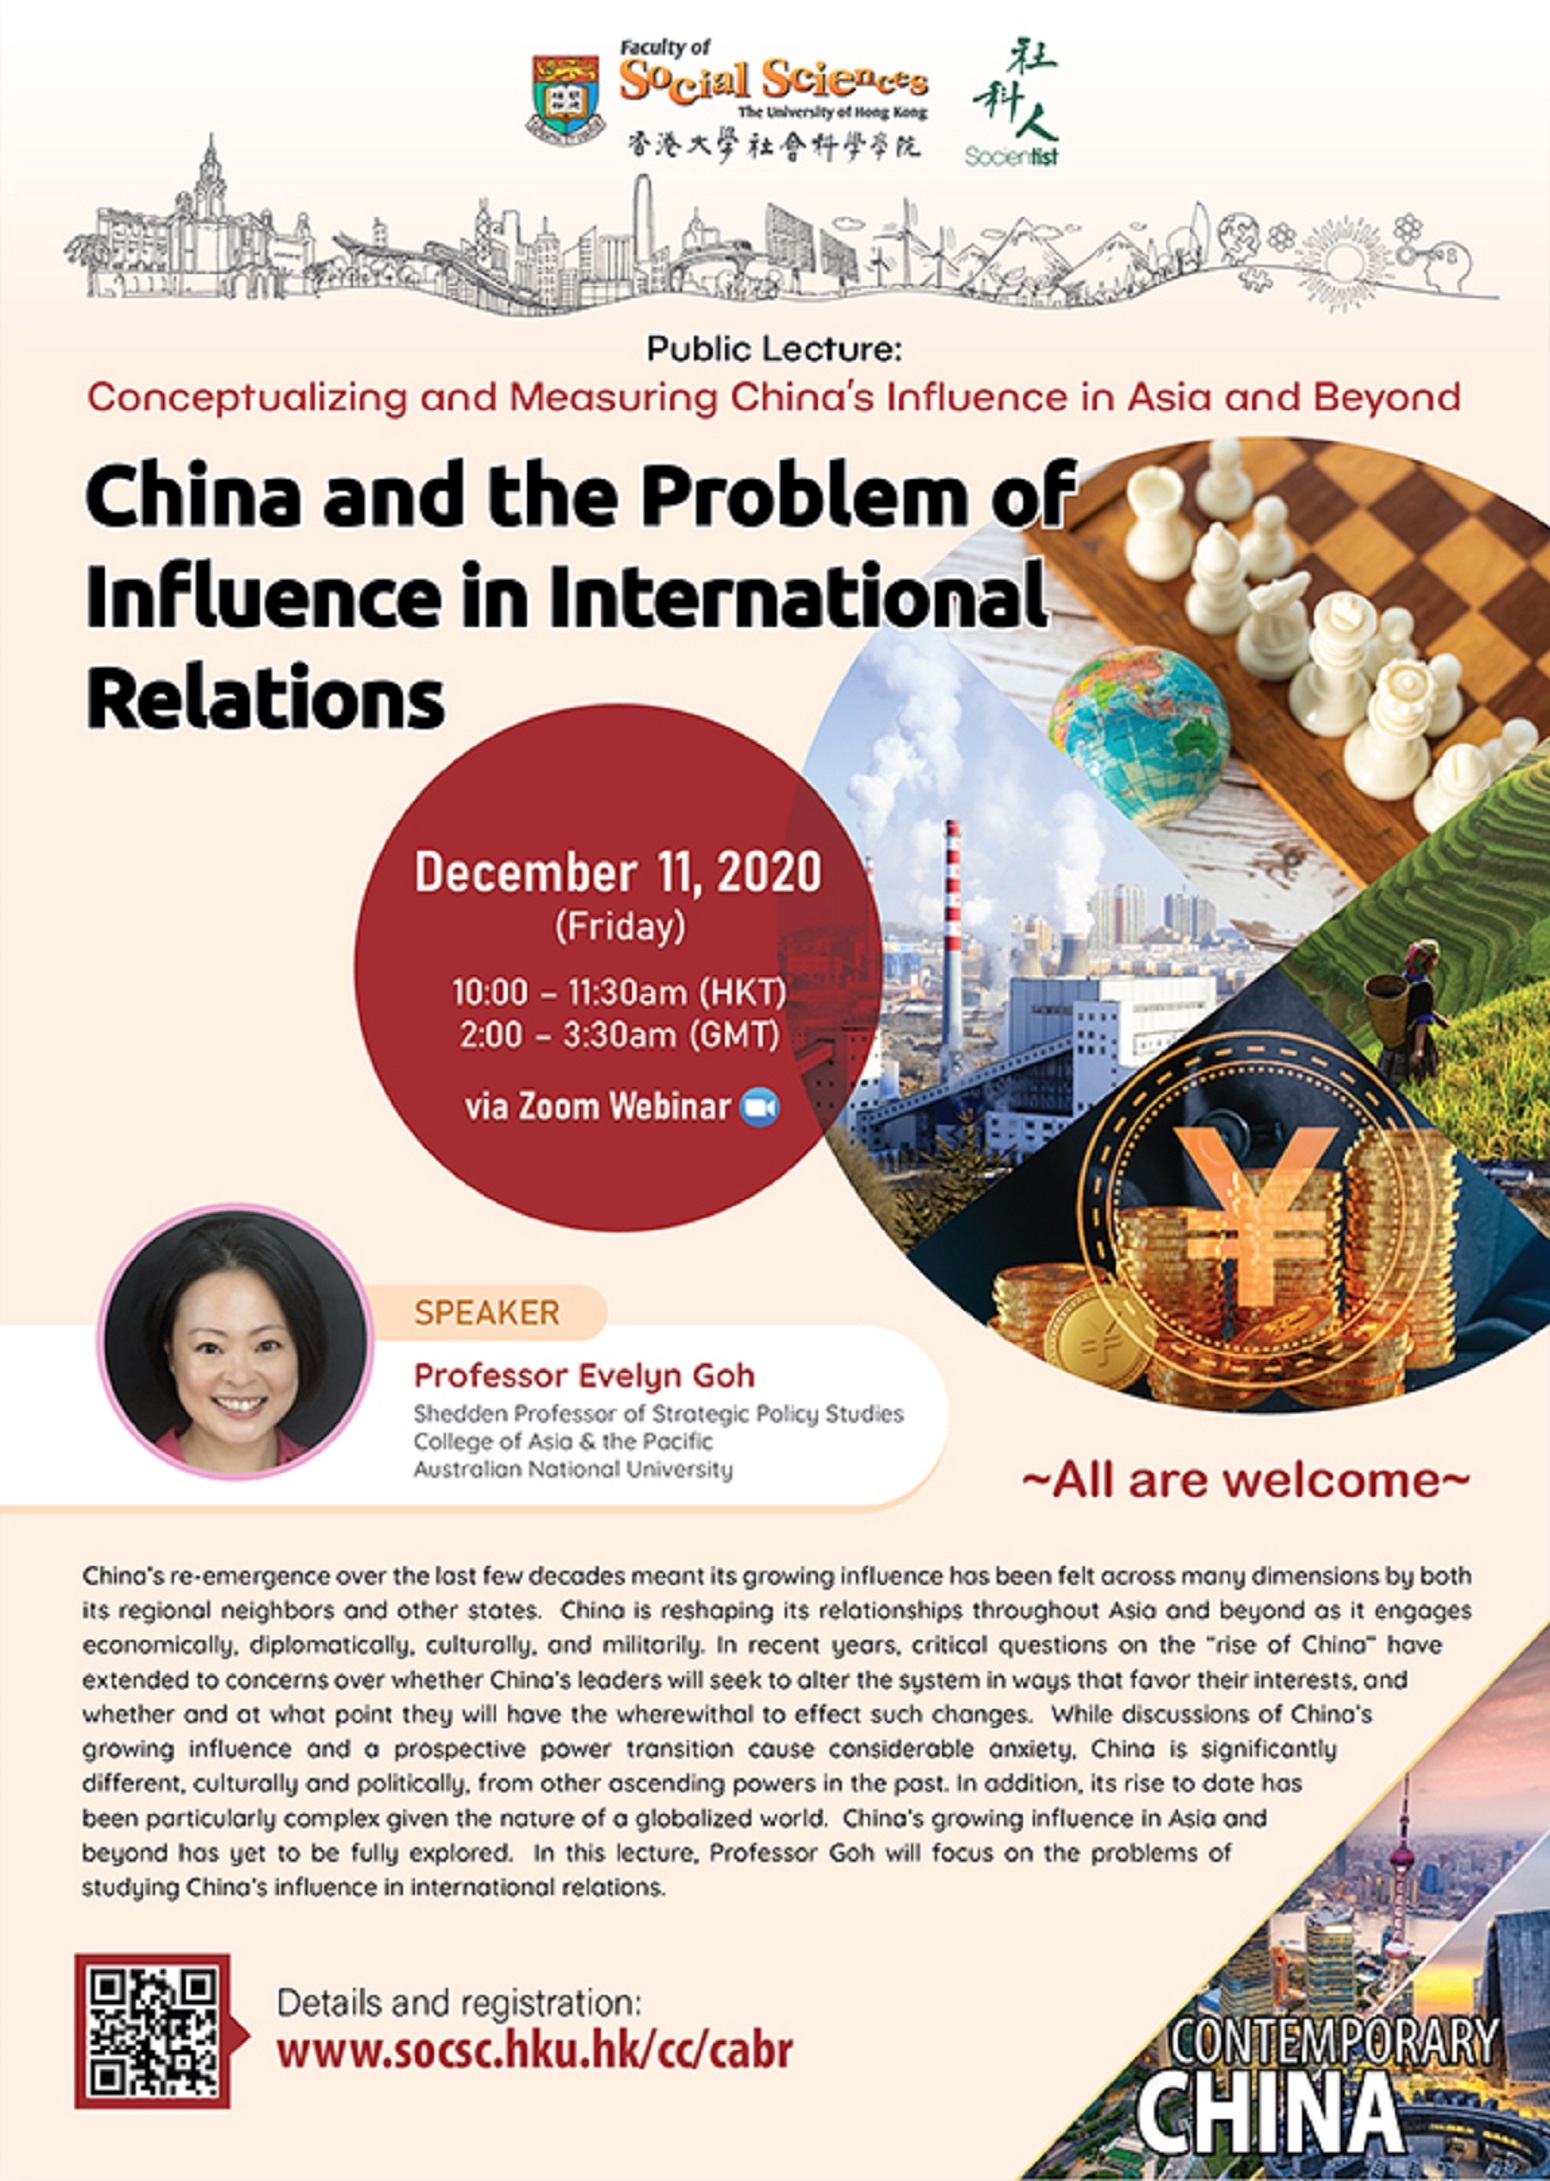 Contemporary China Research Cluster Public Lecture - China and the Problem of Influence in International Relations (December 11, 10am)